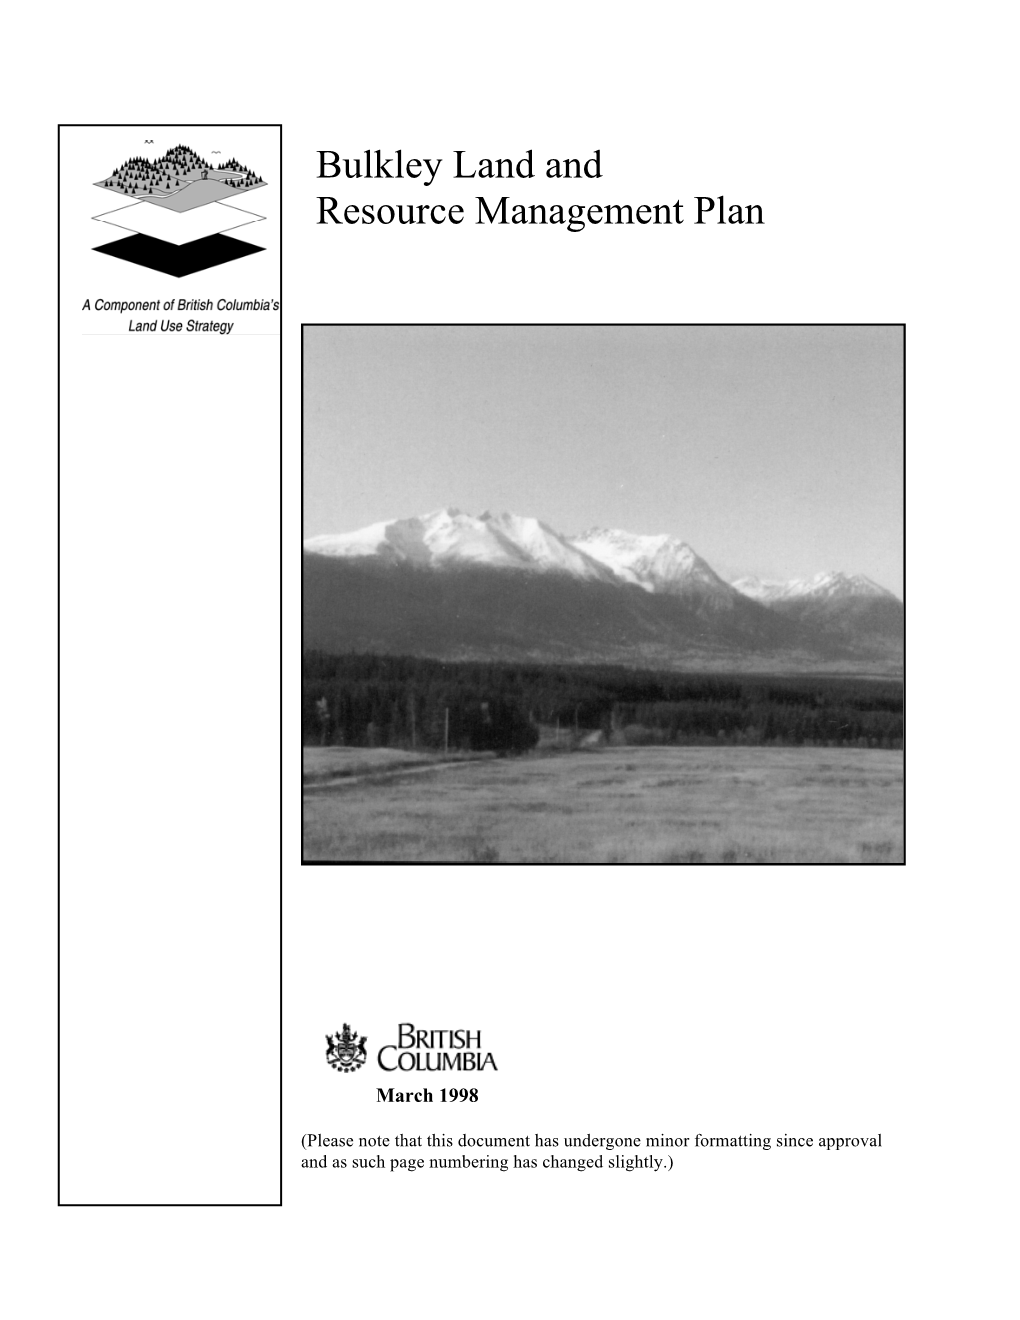 Bulkley Land and Resource Management Plan (LRMP) Is a Sub- Regional Land Use Plan Covering Approximately 760,000 Hectares of North Central British Columbia